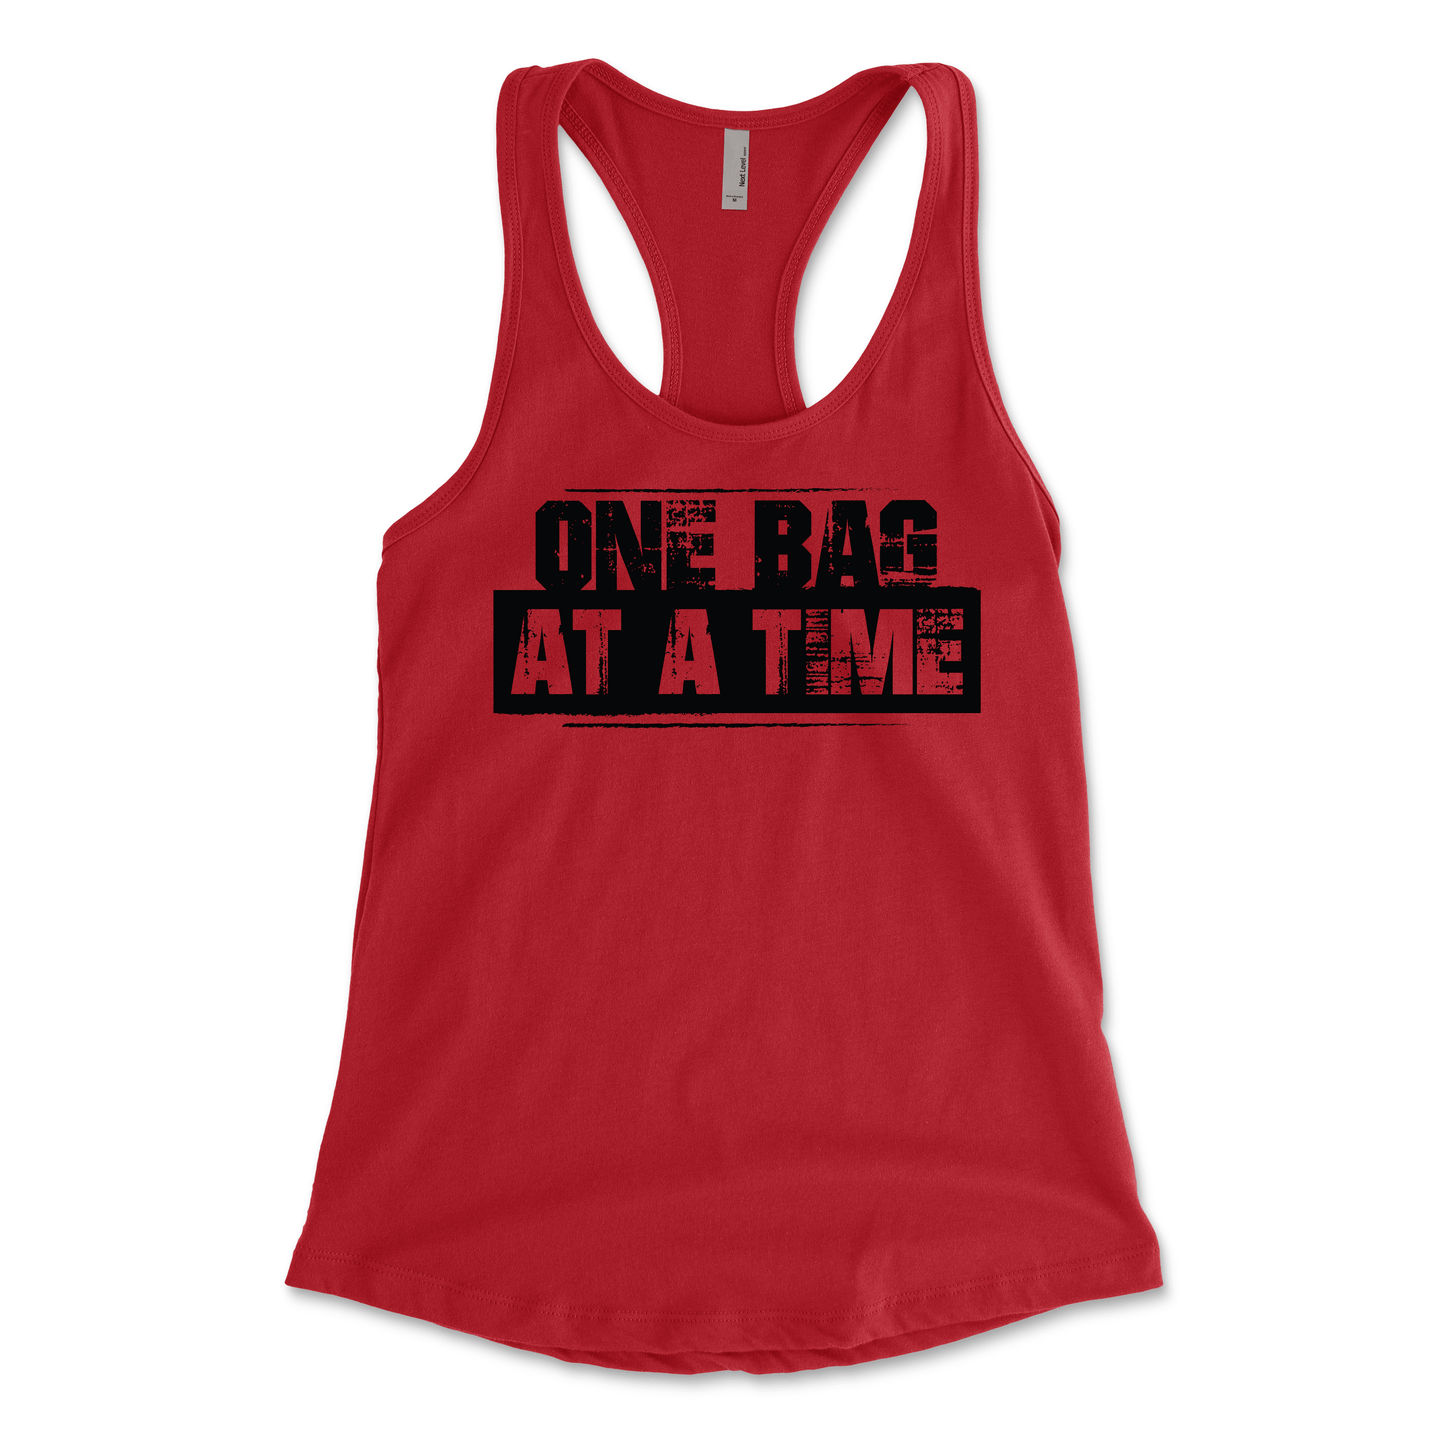 Racer Back "One Bag at a Time" T-Shirt